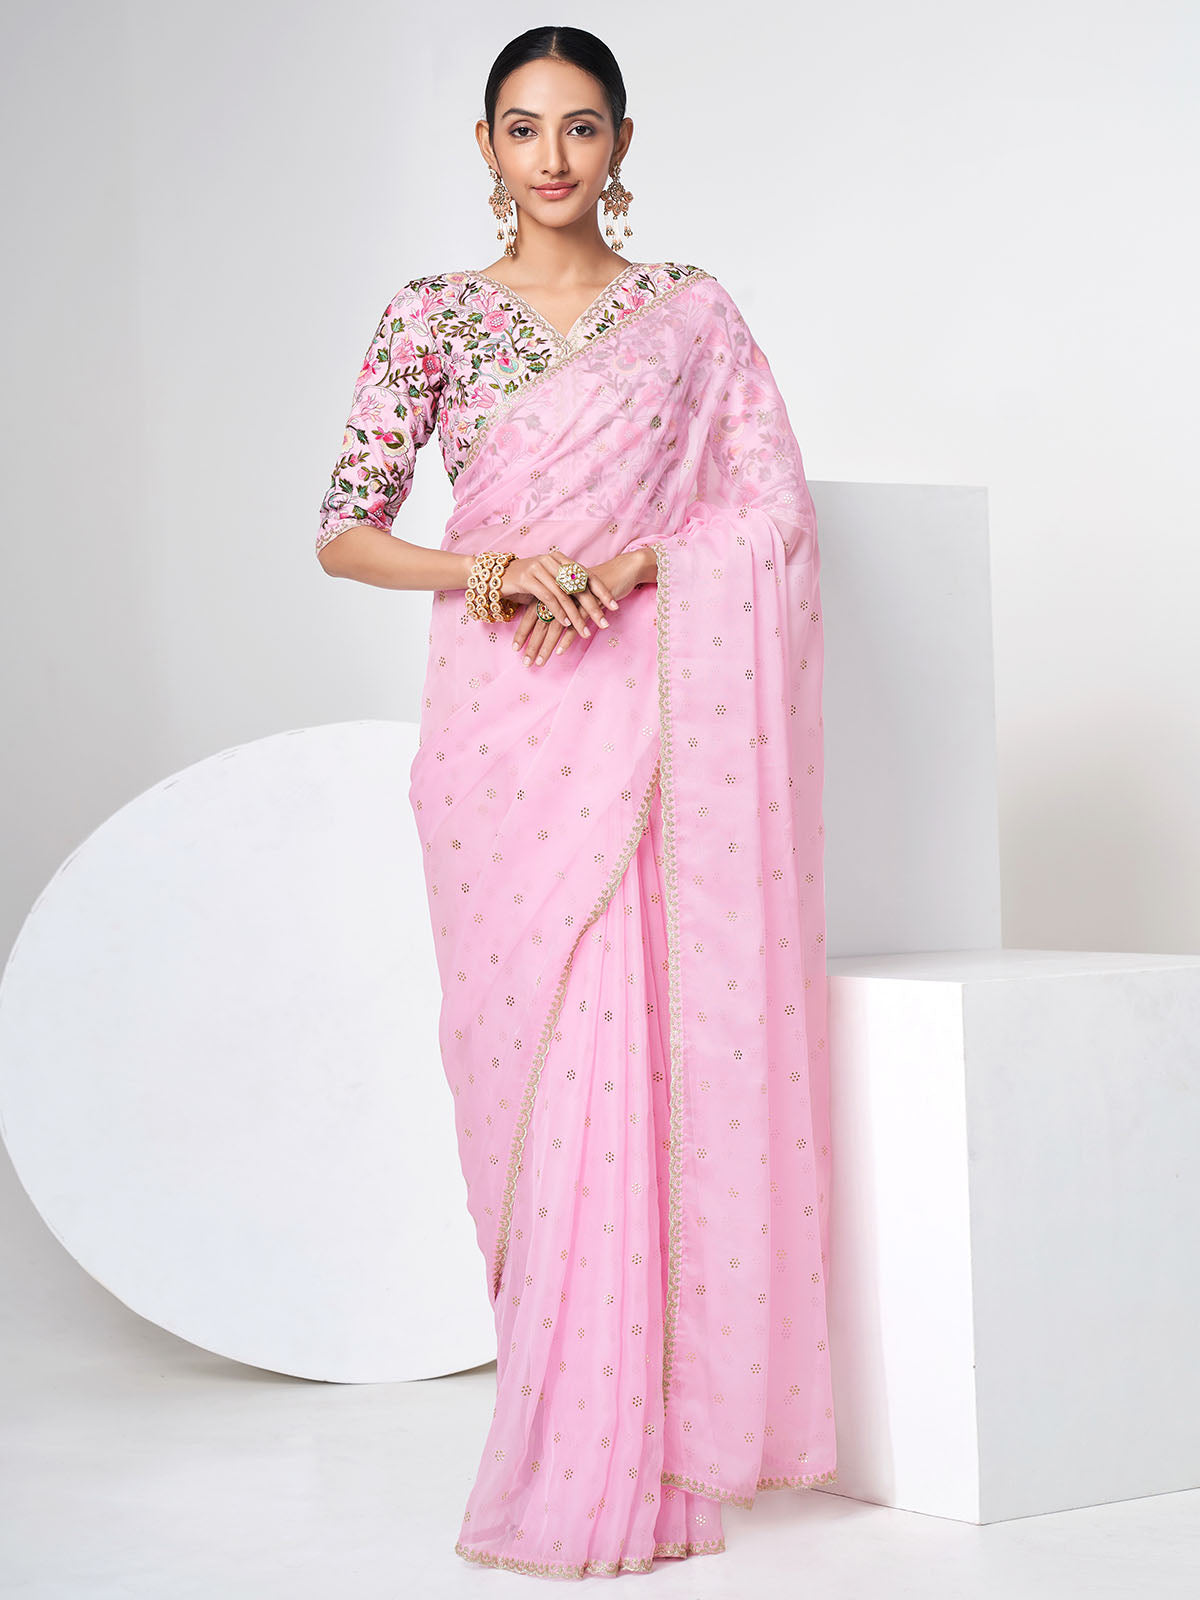 Orgenza Dark Lavender Color Pure Heavy Organza Silk And Silver Embroidery  Work With Contrast Blouse, Heavy Border Saree, बॉर्डर साड़ी - Orgenza  Store, Surat | ID: 24265583073